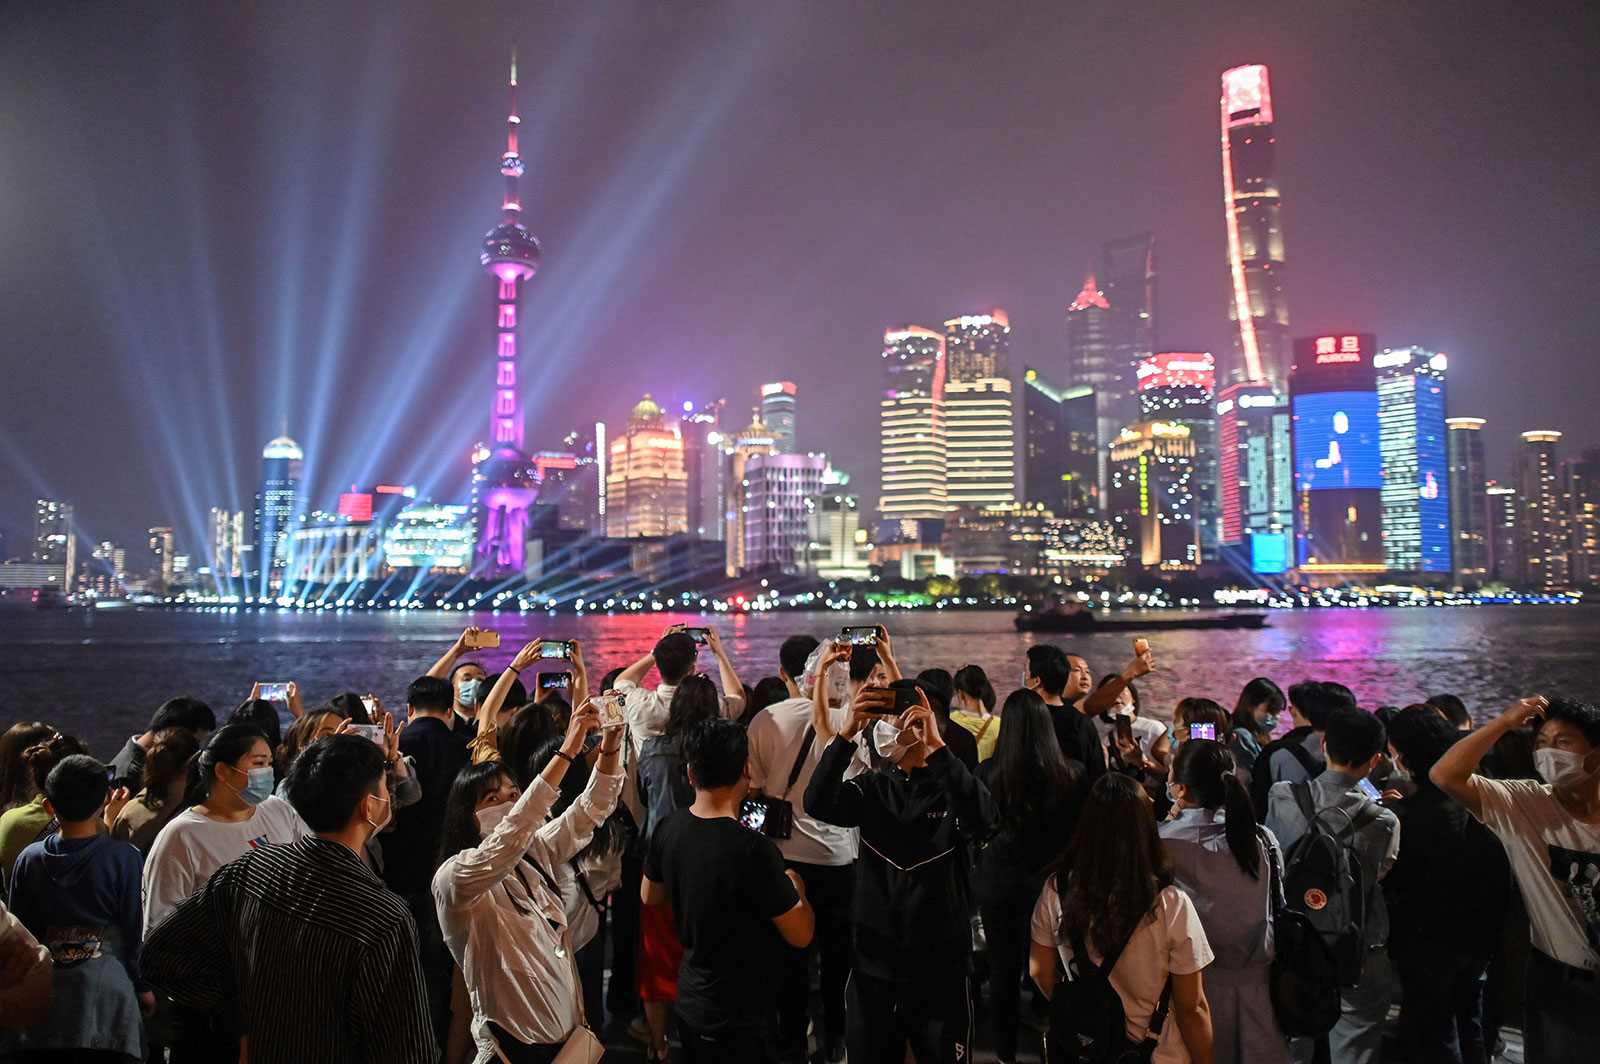 People visit the promenade on The Bund along the Huangpu River in Shanghai on May 1.